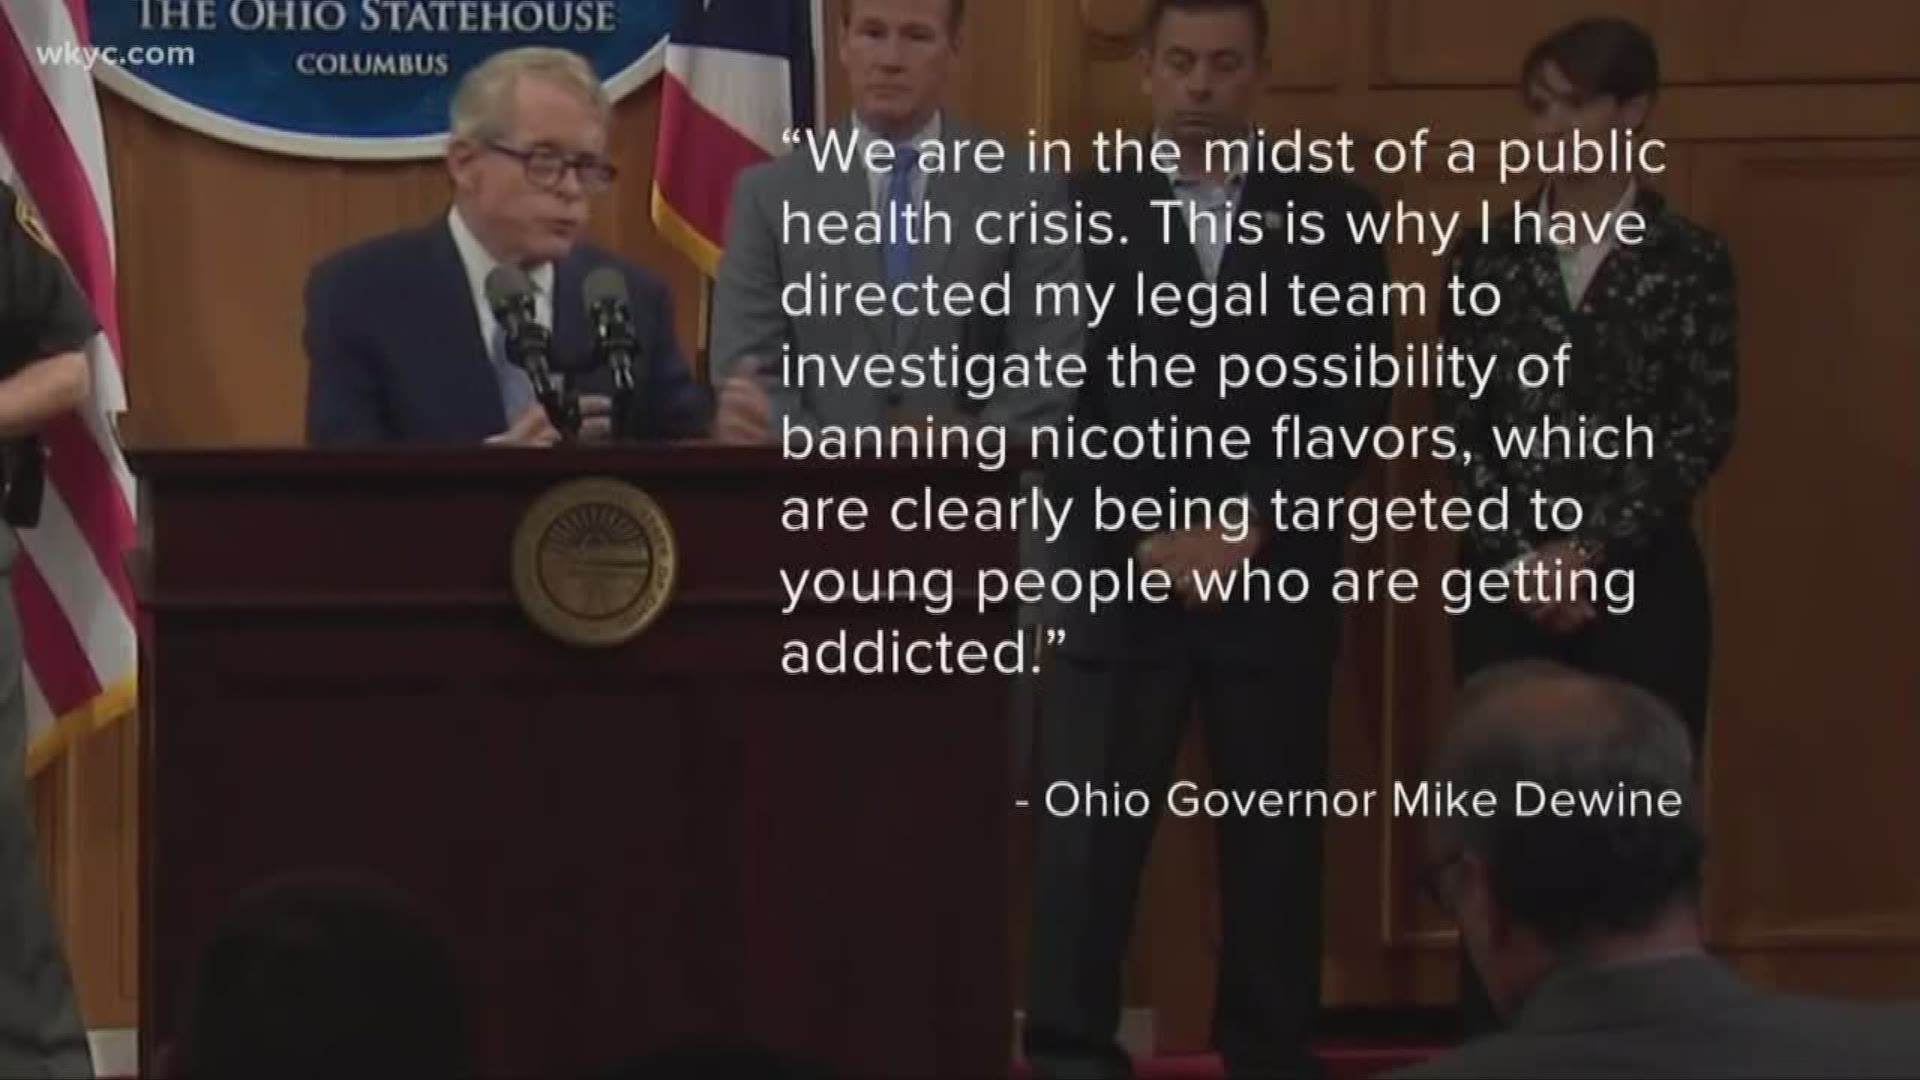 The discussion over vaping has turned into public health warnings. Gov. Mike DeWine is looking at what can be done in the state.